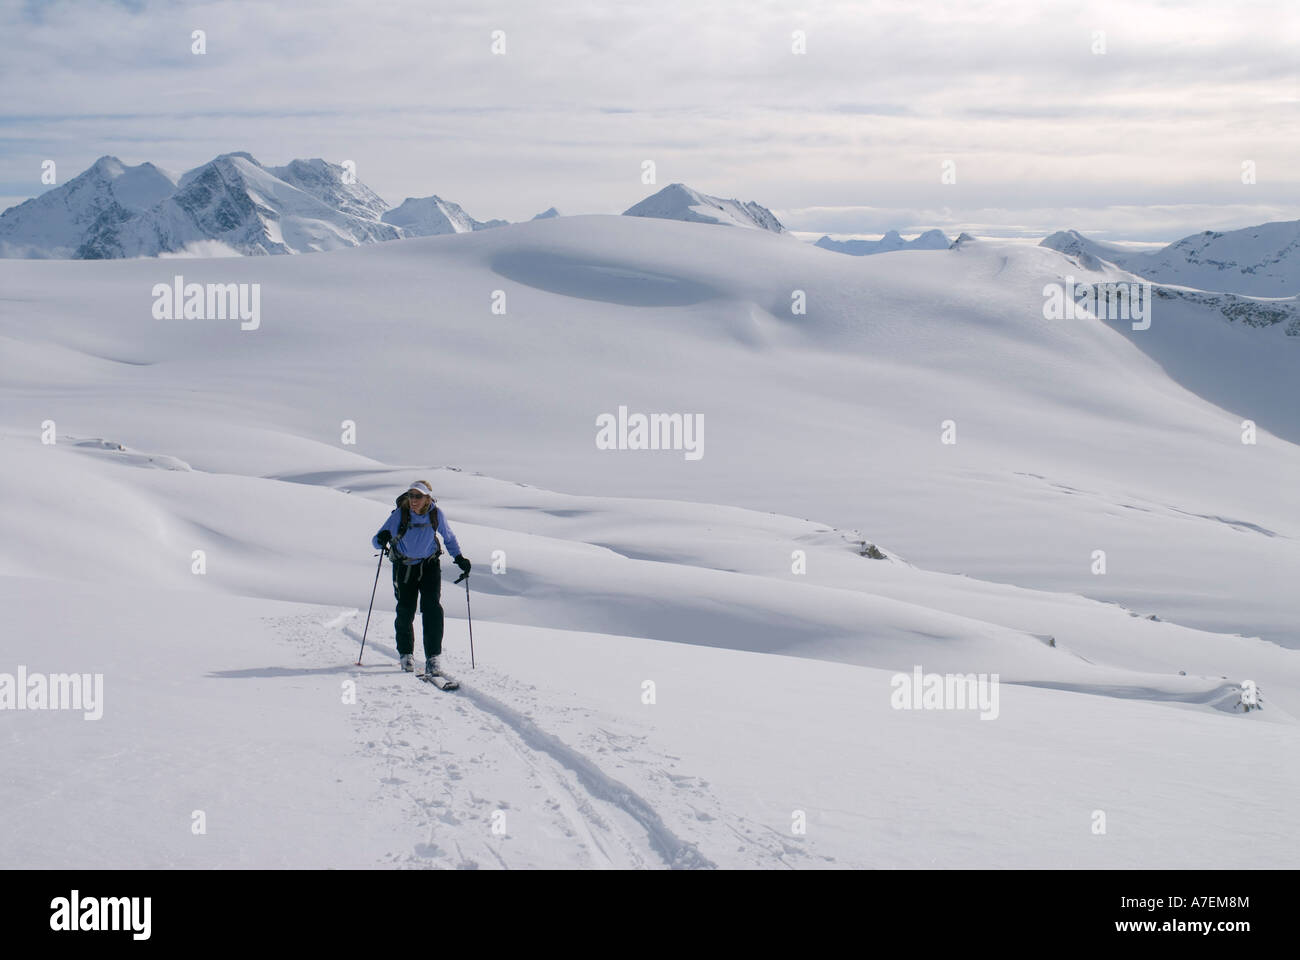 Skier skinning on The Illicilliwaet Glacier, Rogers Pass area, Selkirk Mountains, Canadian Rockies, British Columbia, Canada Stock Photo